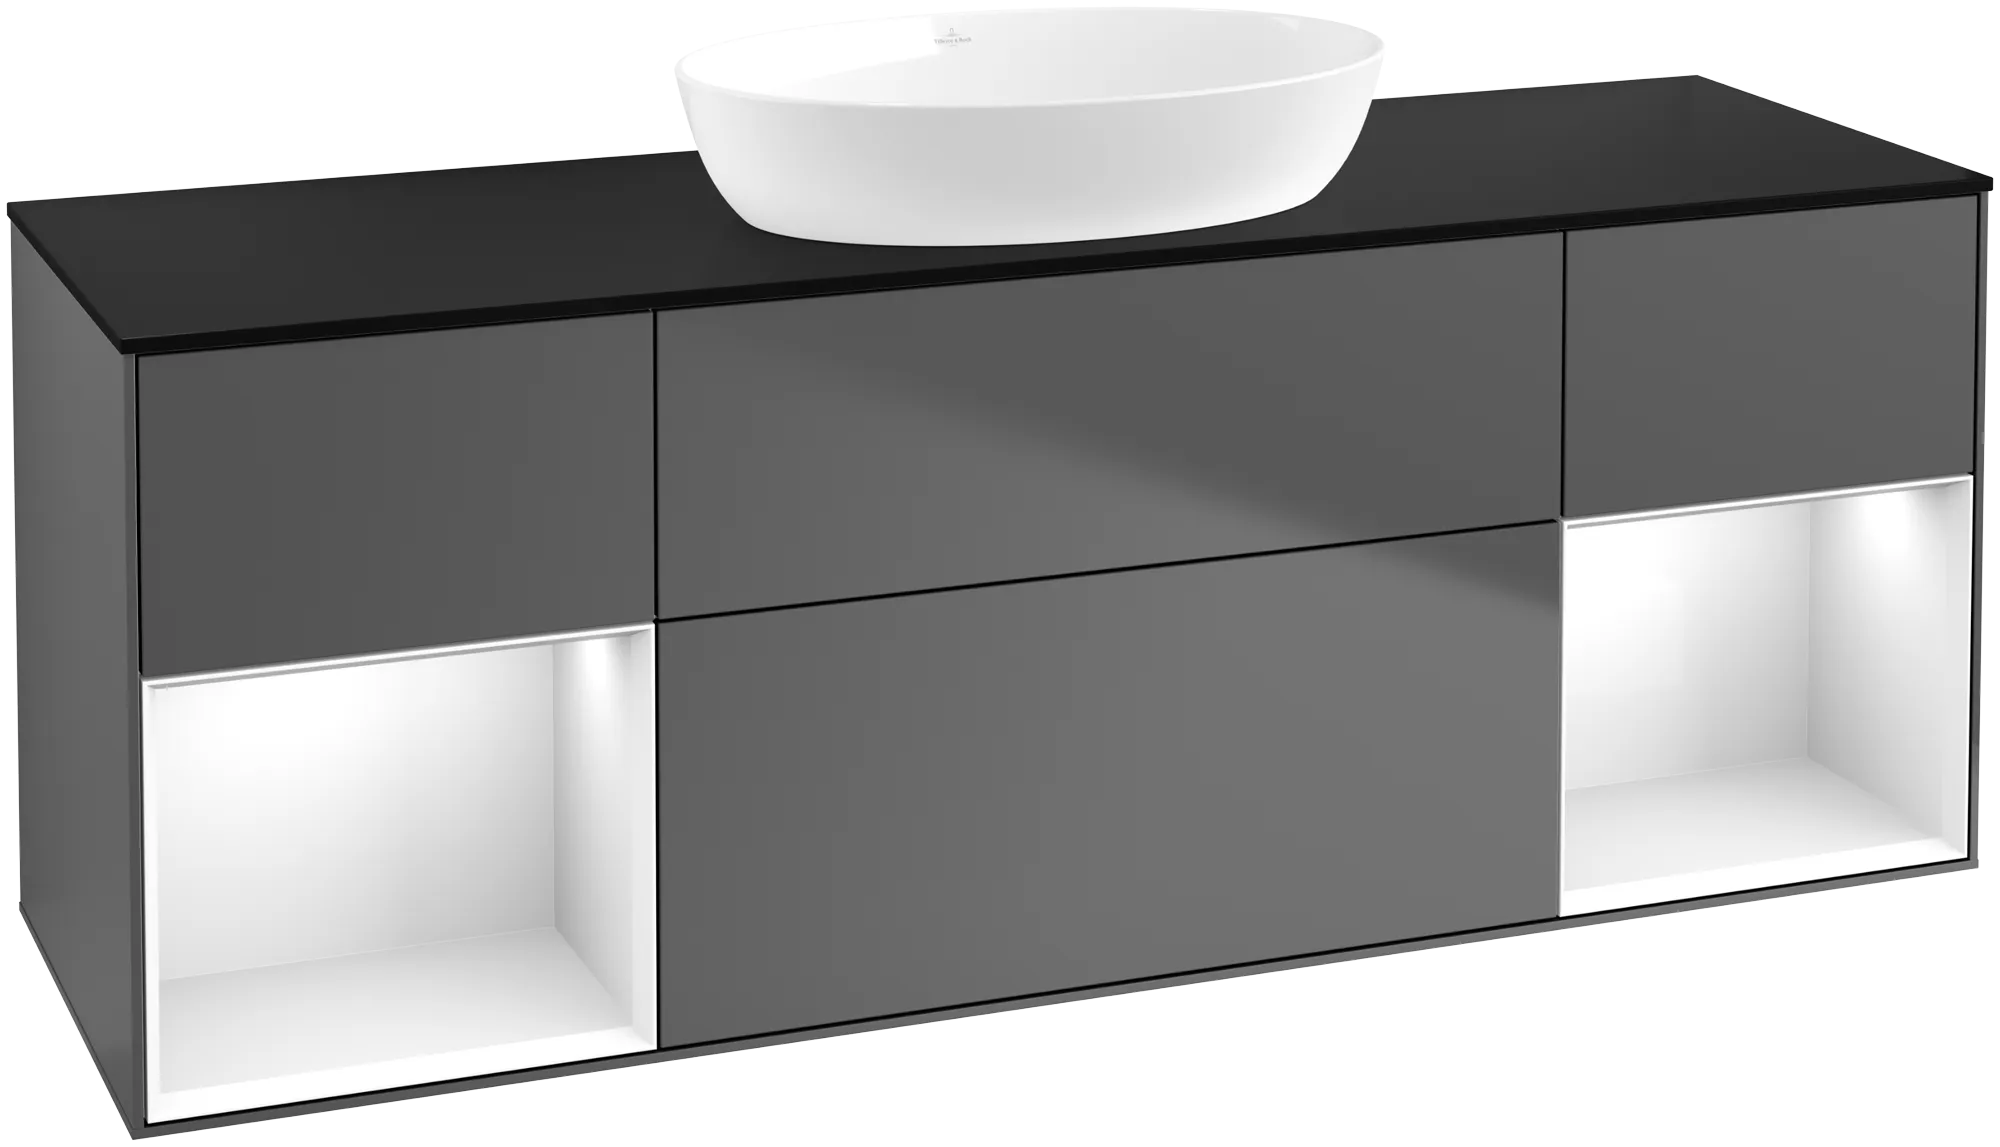 Picture of VILLEROY BOCH Finion Vanity unit, with lighting, 4 pull-out compartments, 1600 x 603 x 501 mm, Anthracite Matt Lacquer / Glossy White Lacquer / Glass Black Matt #GD02GFGK